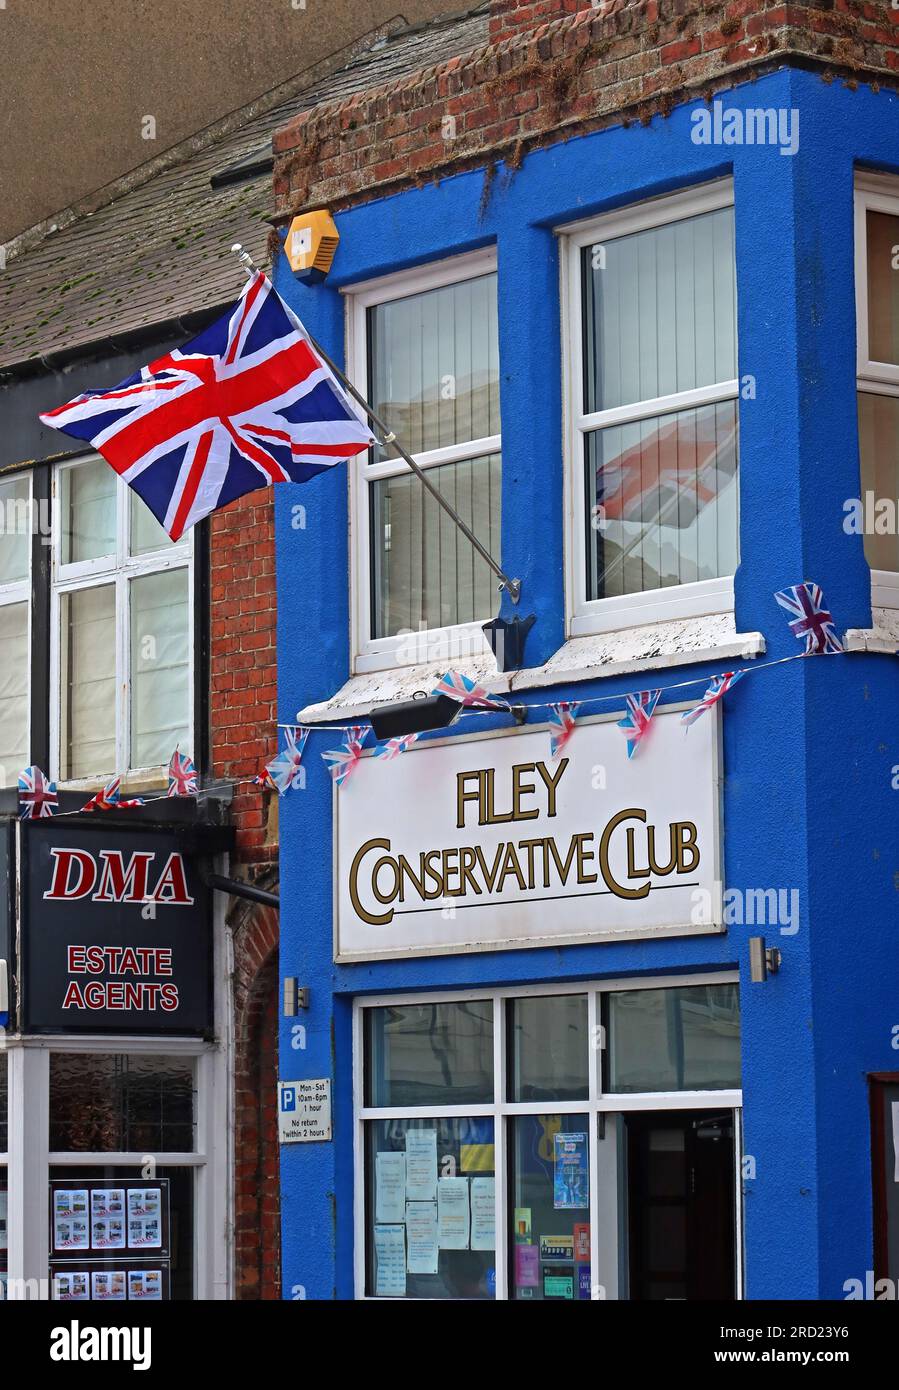 Filey Con Club, 24 Belle Vue St, Filey, North Yorkshire, England, UK,  YO14 9HY Stock Photo